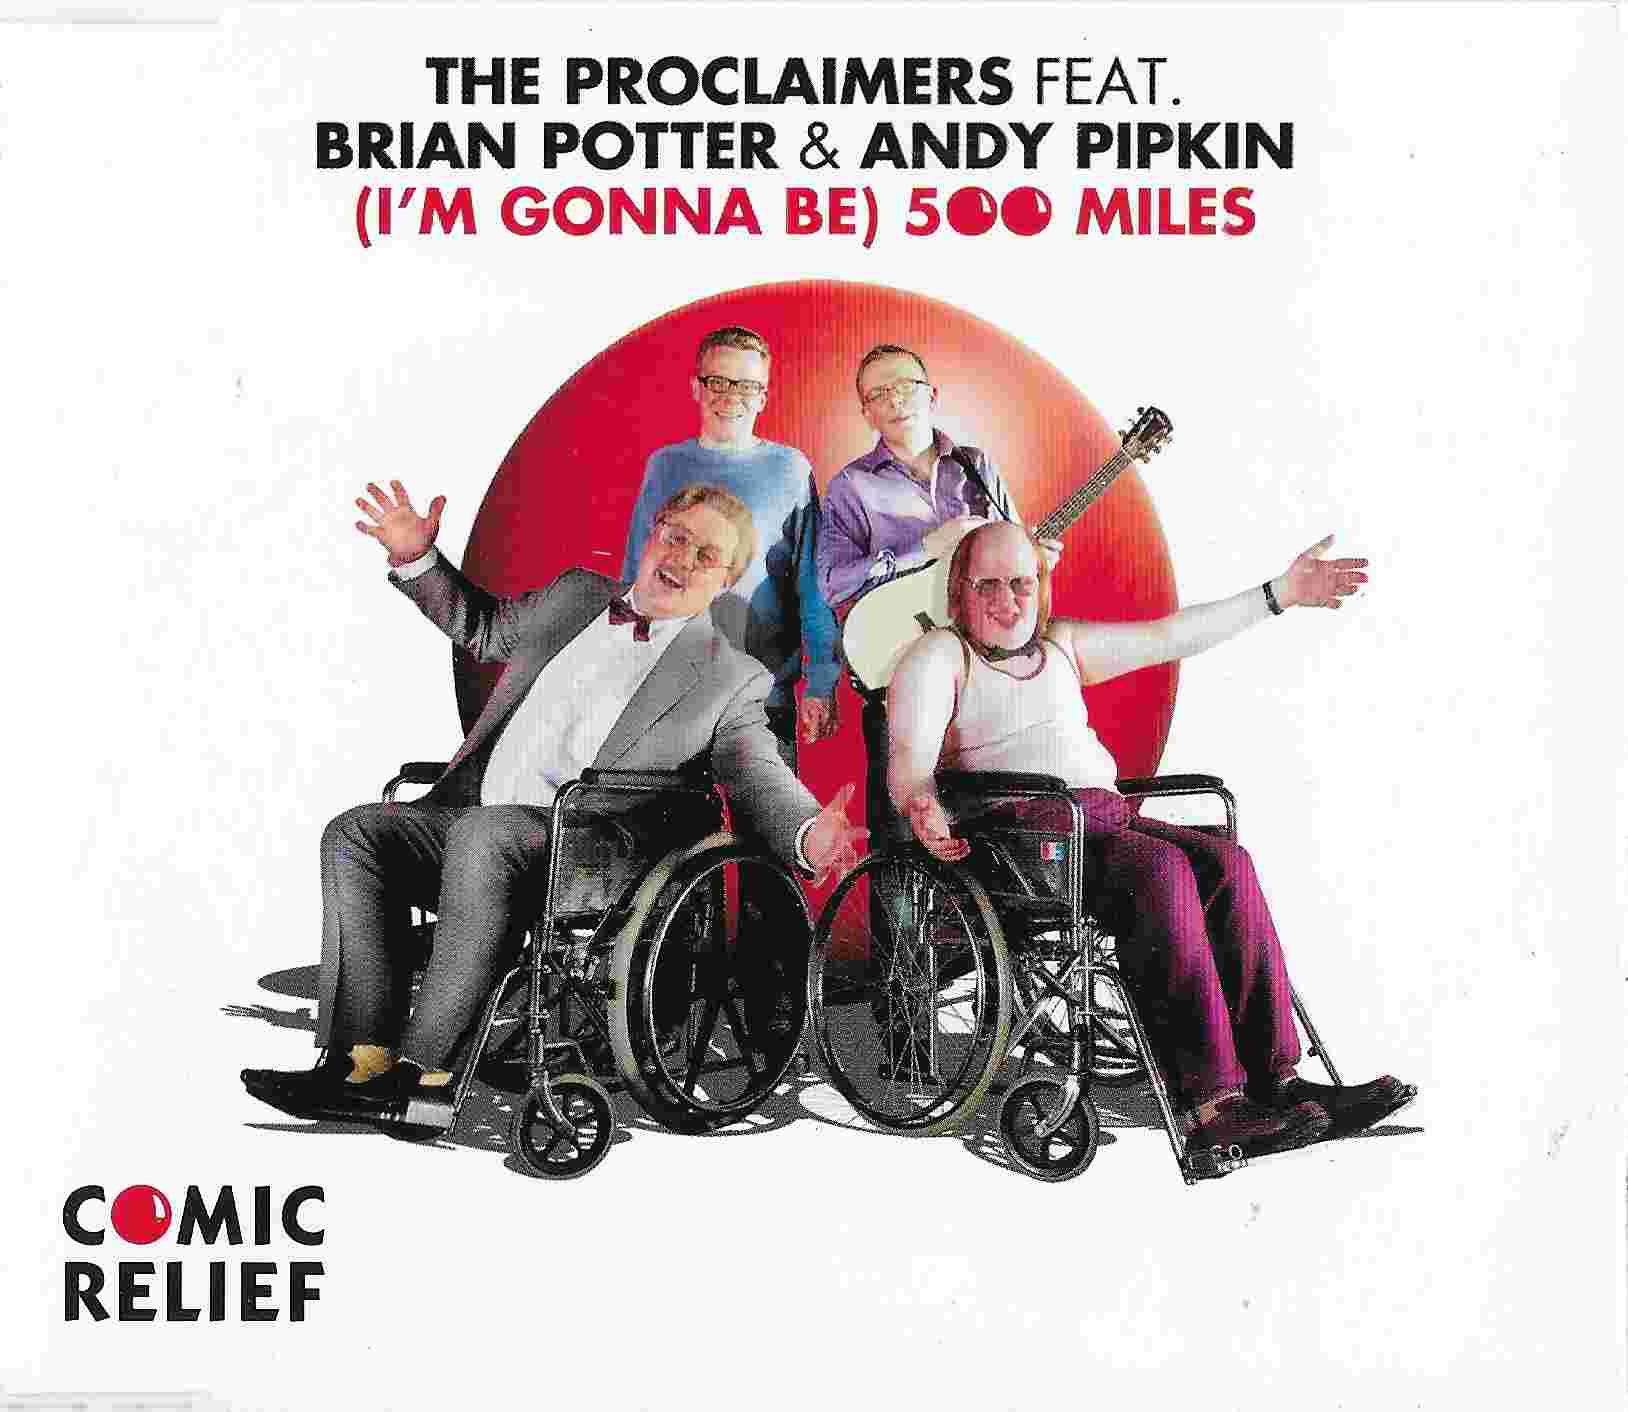 Picture of (I'm gonna be) 500 miles by artist The Proclaimers featuring Brian Potter and Andy Pipkin 